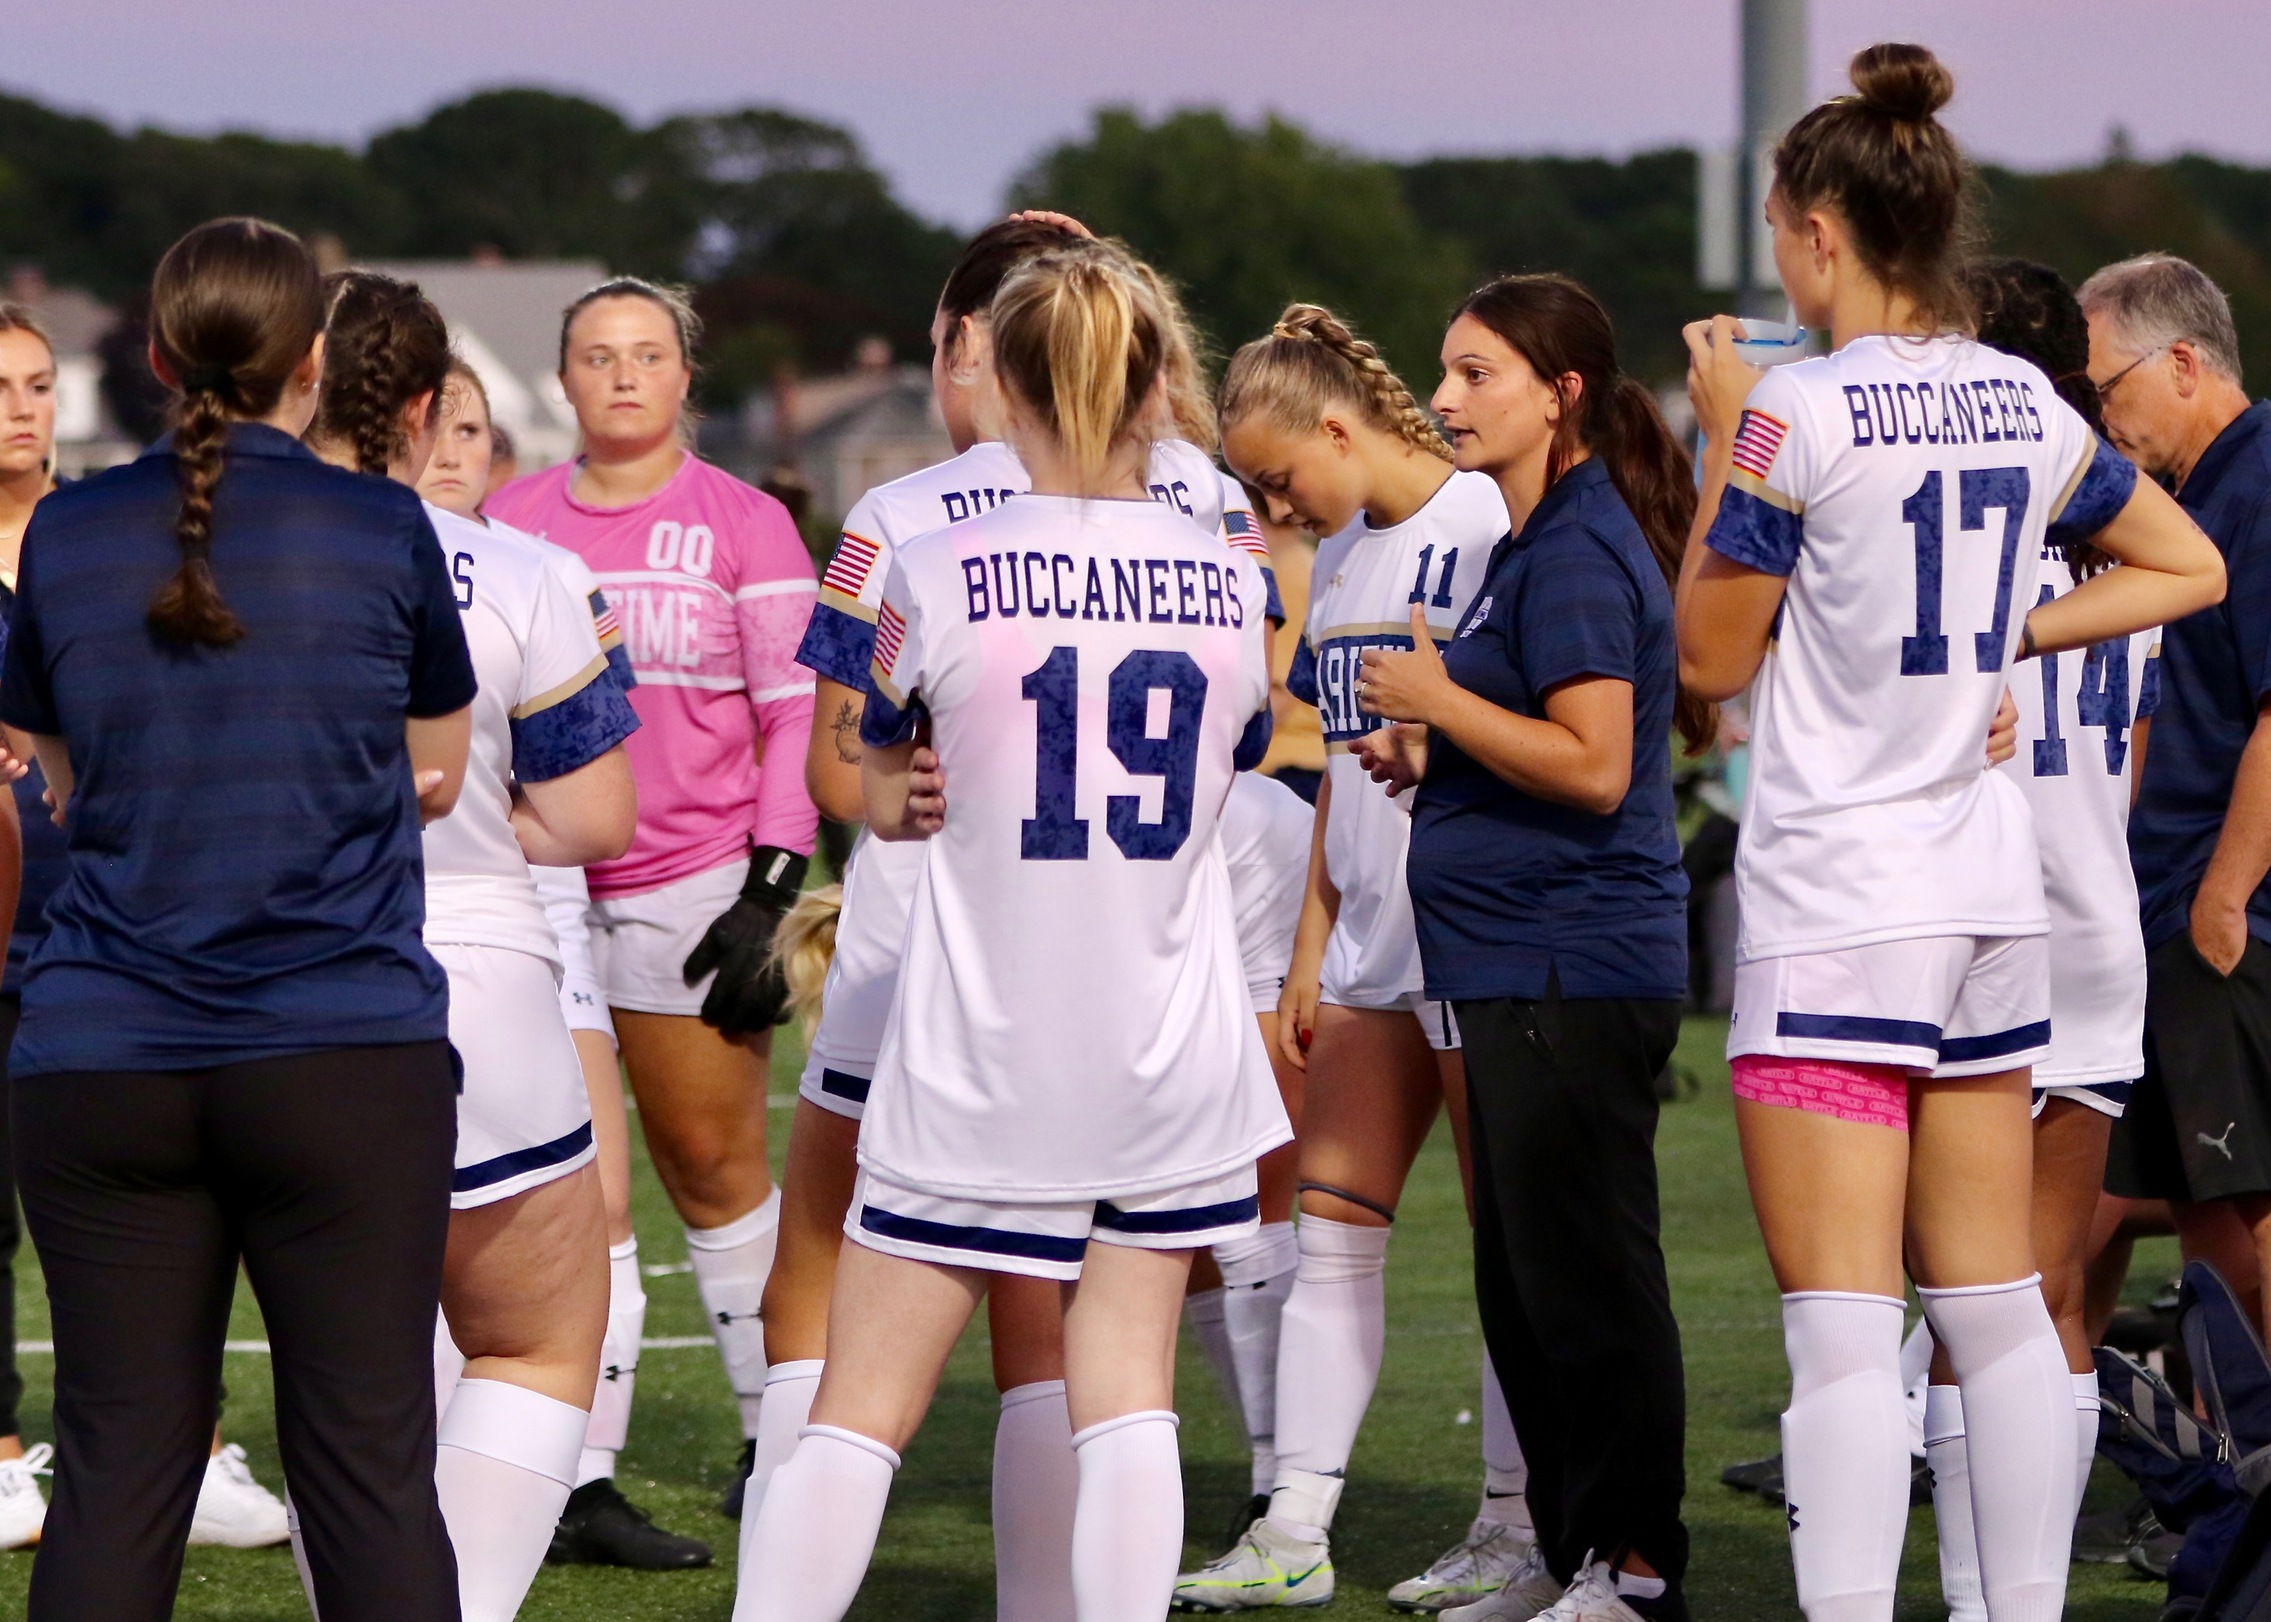 Women's Soccer Heads to Postseason for First Time in Program History